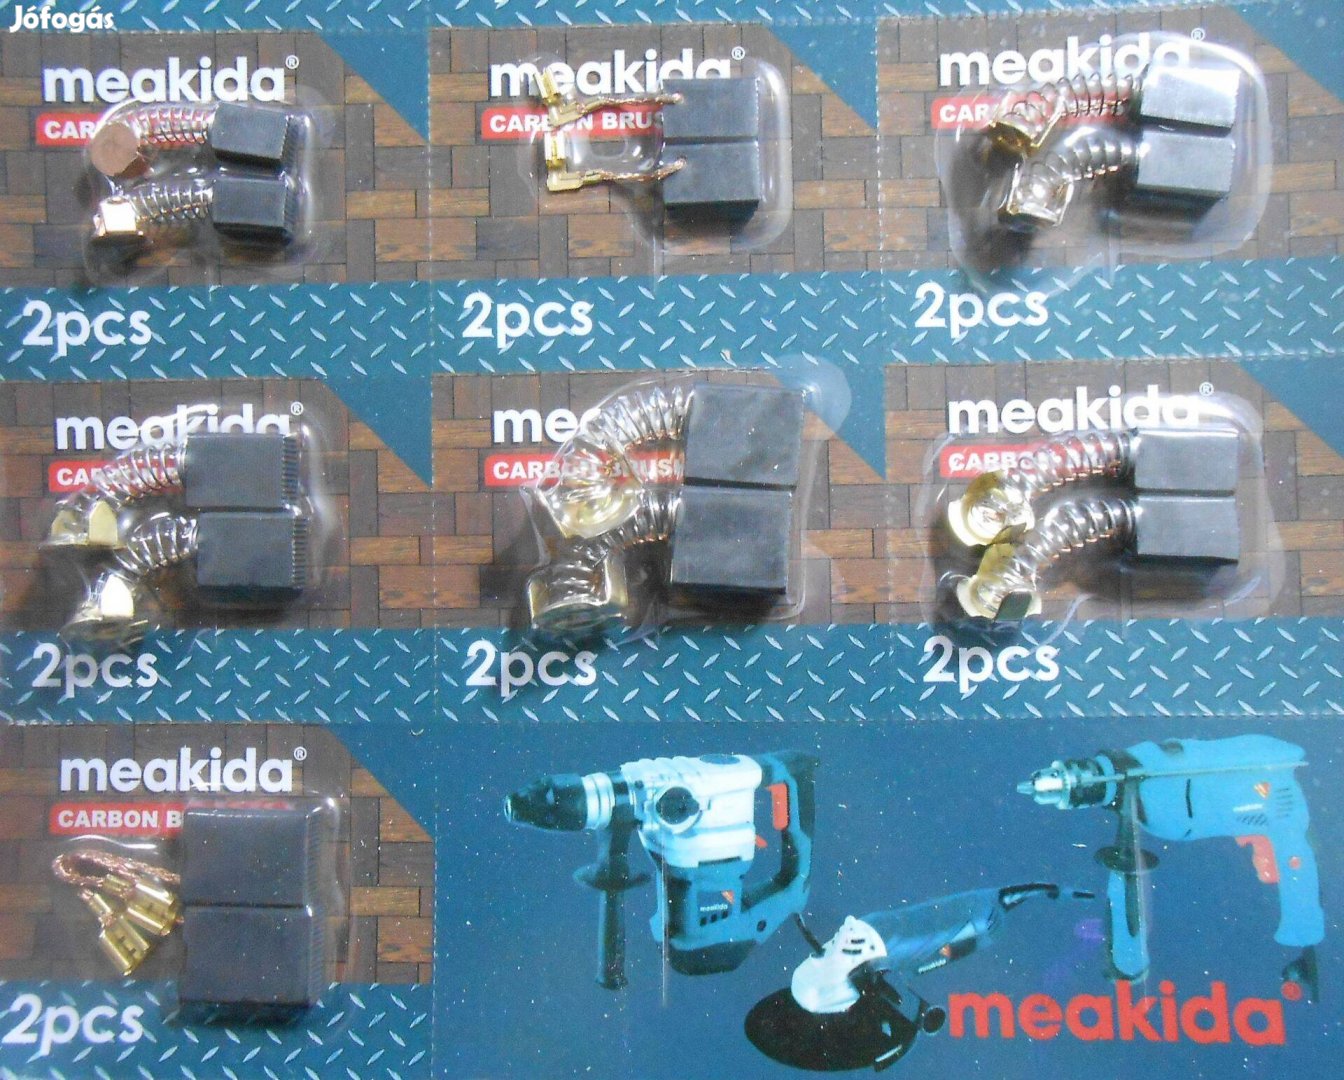 Meakida Carbon Brushes